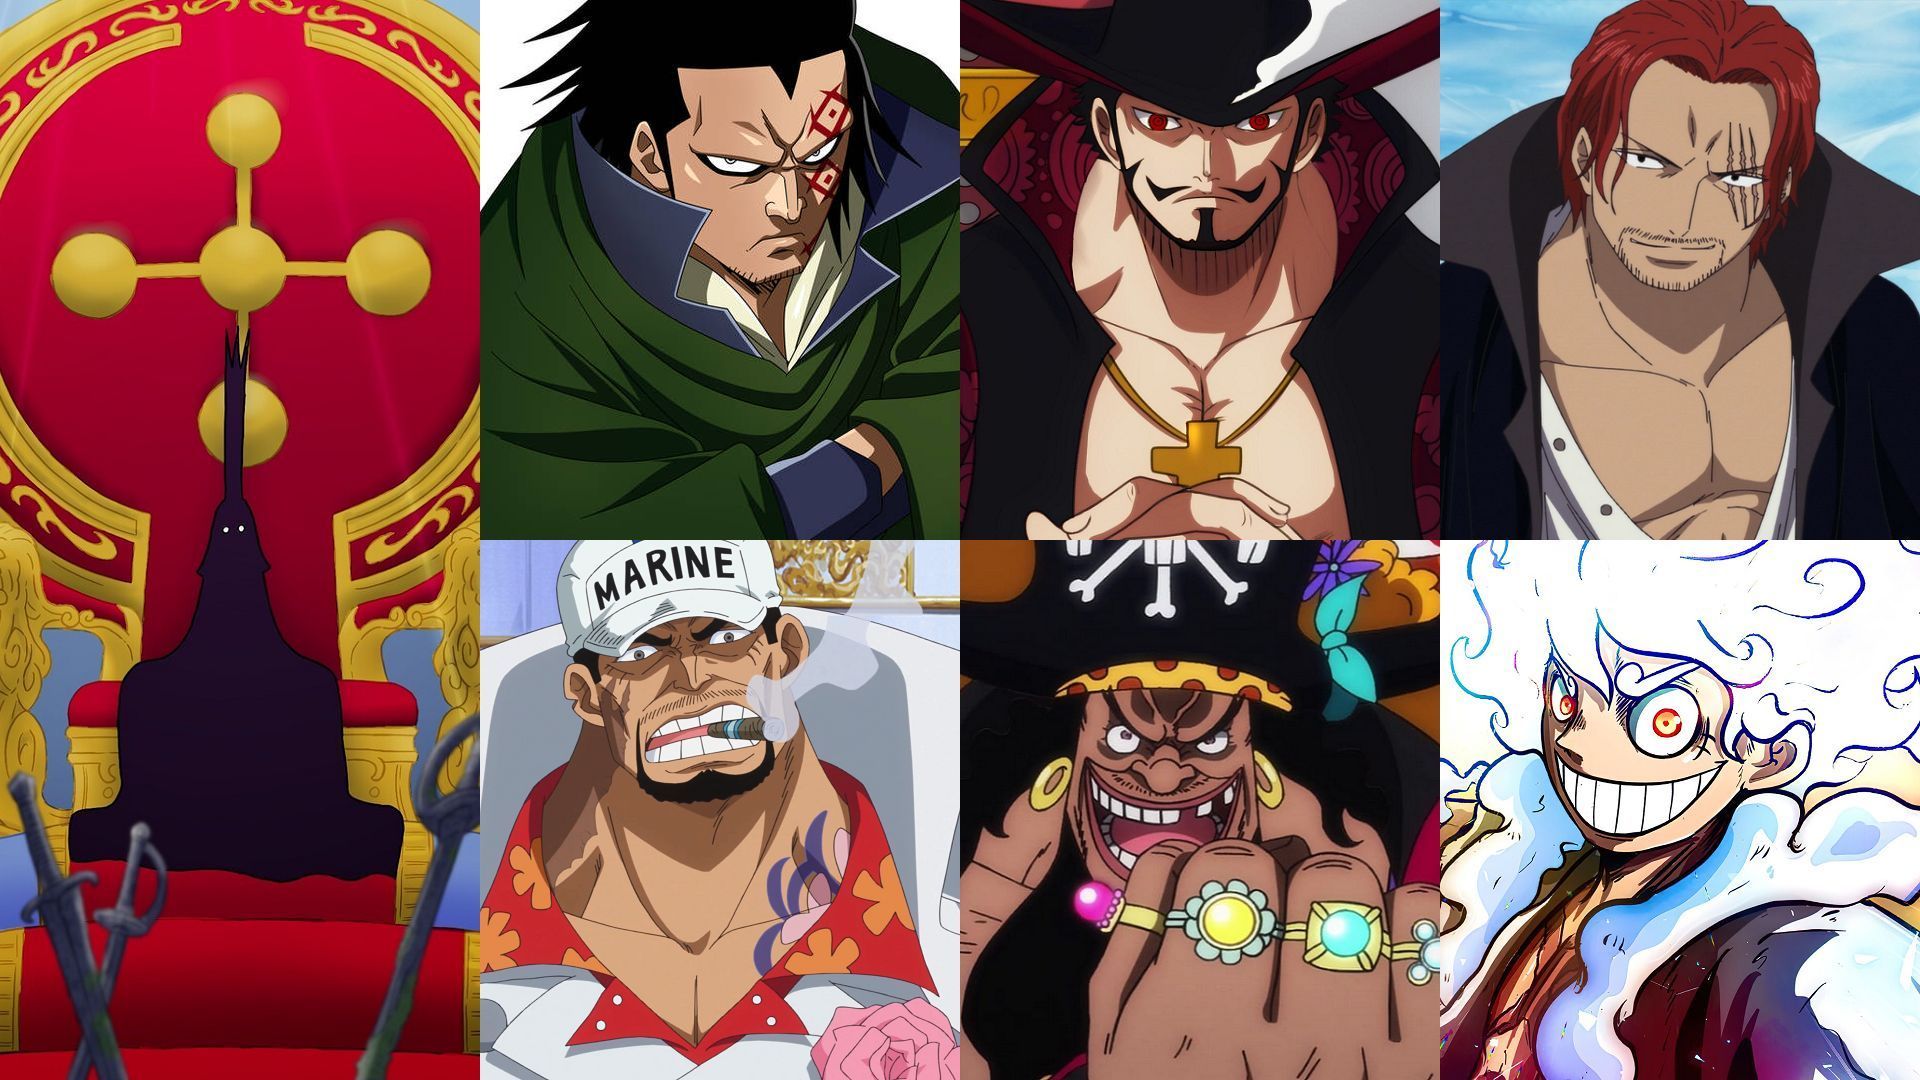 At this point in the series, these characters are the absolute top dogs (Image via Toei Animation, One Piece)